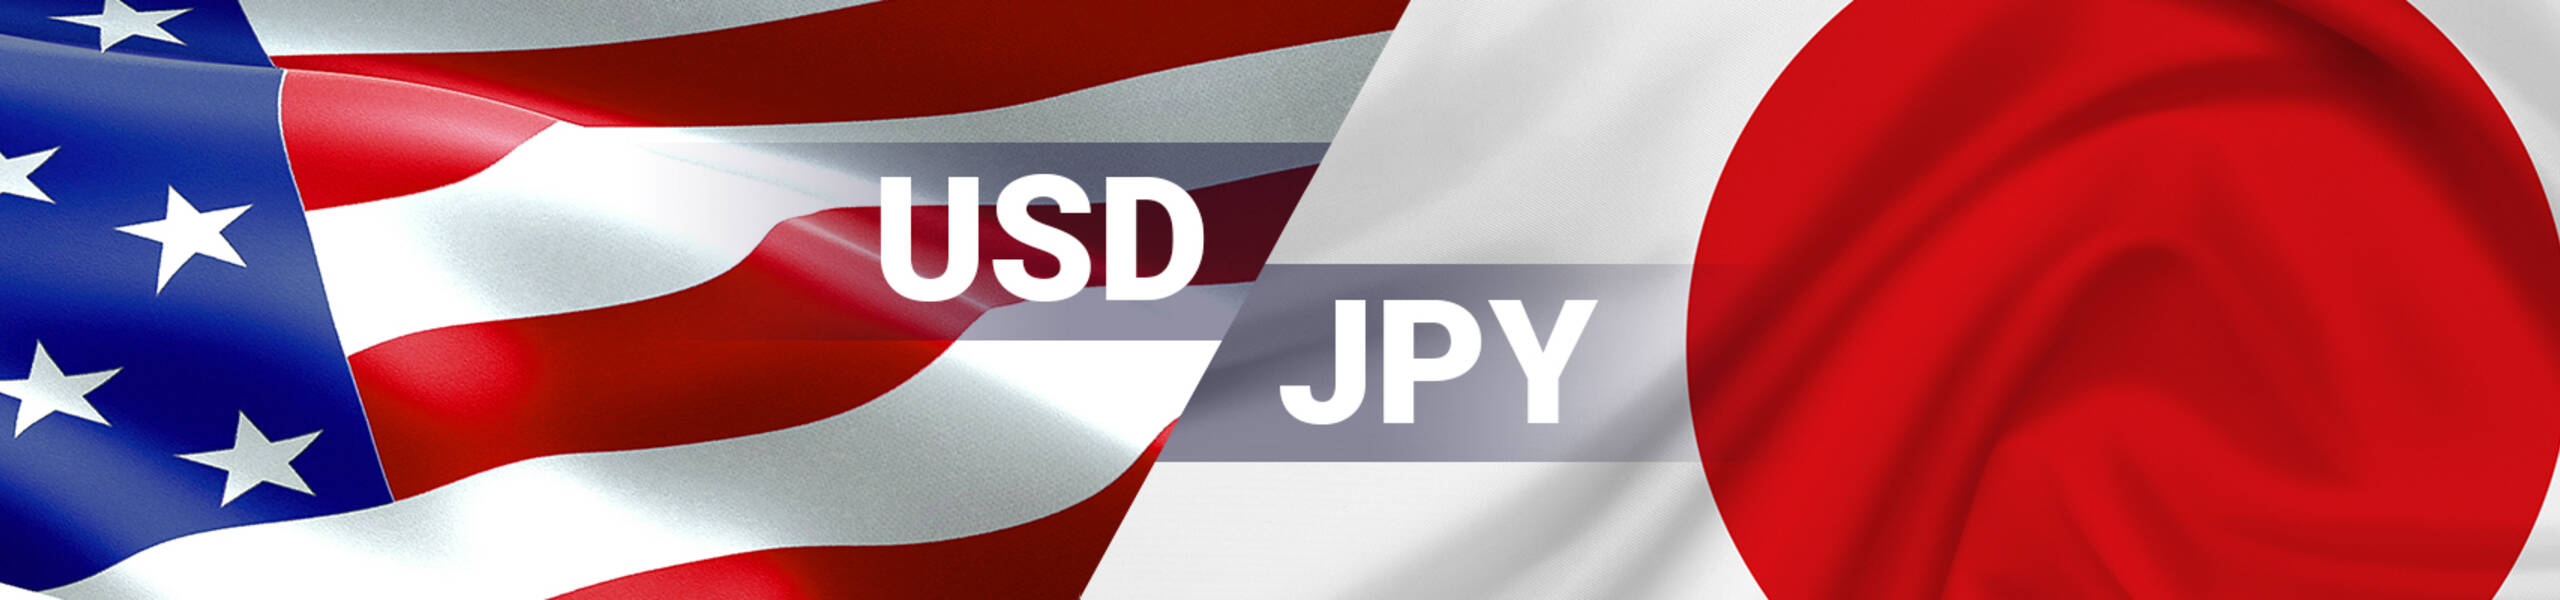 USD/JPY Dailyレポート 2017/10/04